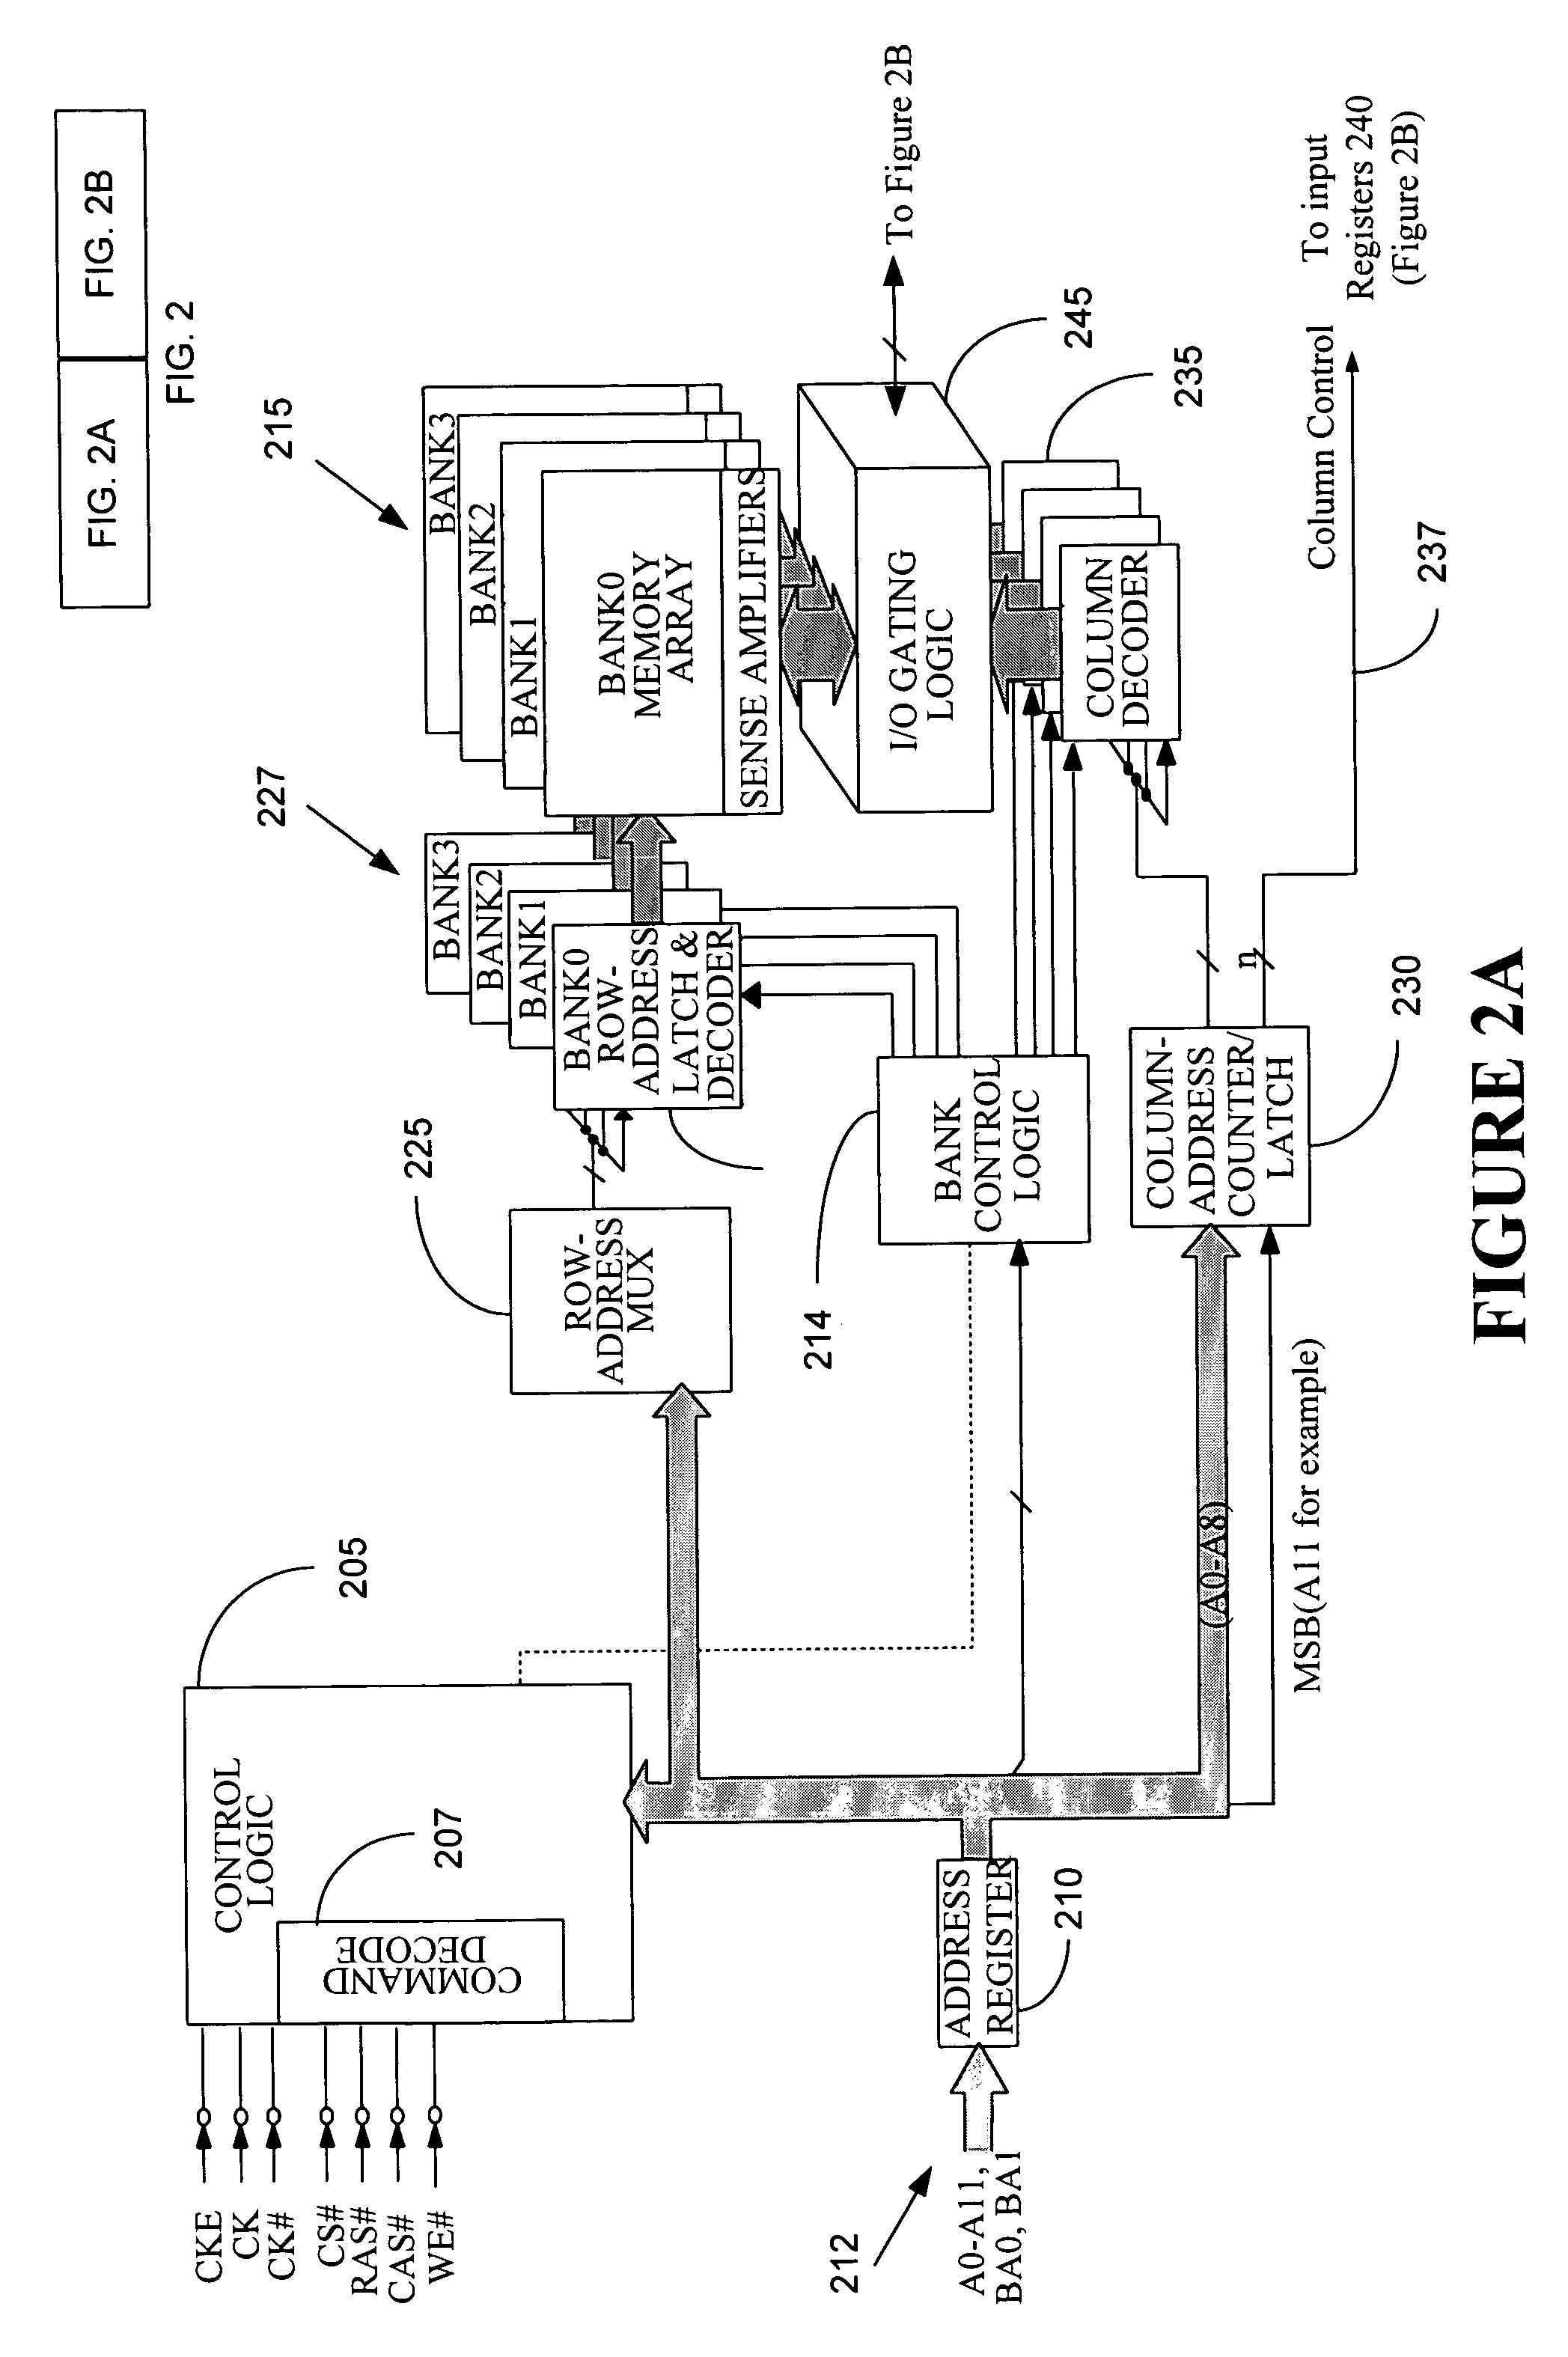 Method and apparatus for accessing a dynamic memory device by providing at least one of burst and latency information over at least one of redundant row and column address lines